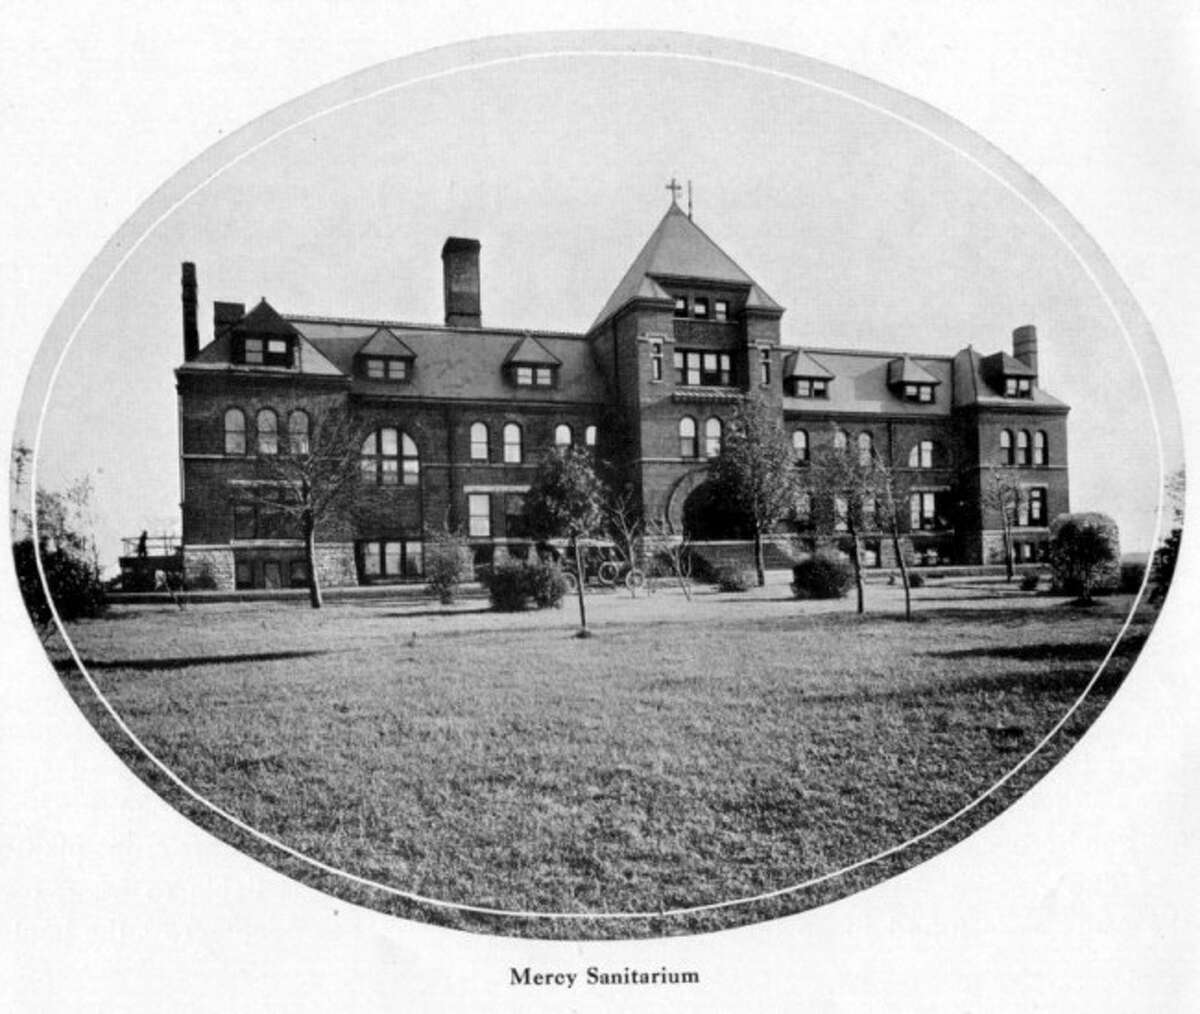 The Mercy Hospital is shown in this early 1900 photograph.